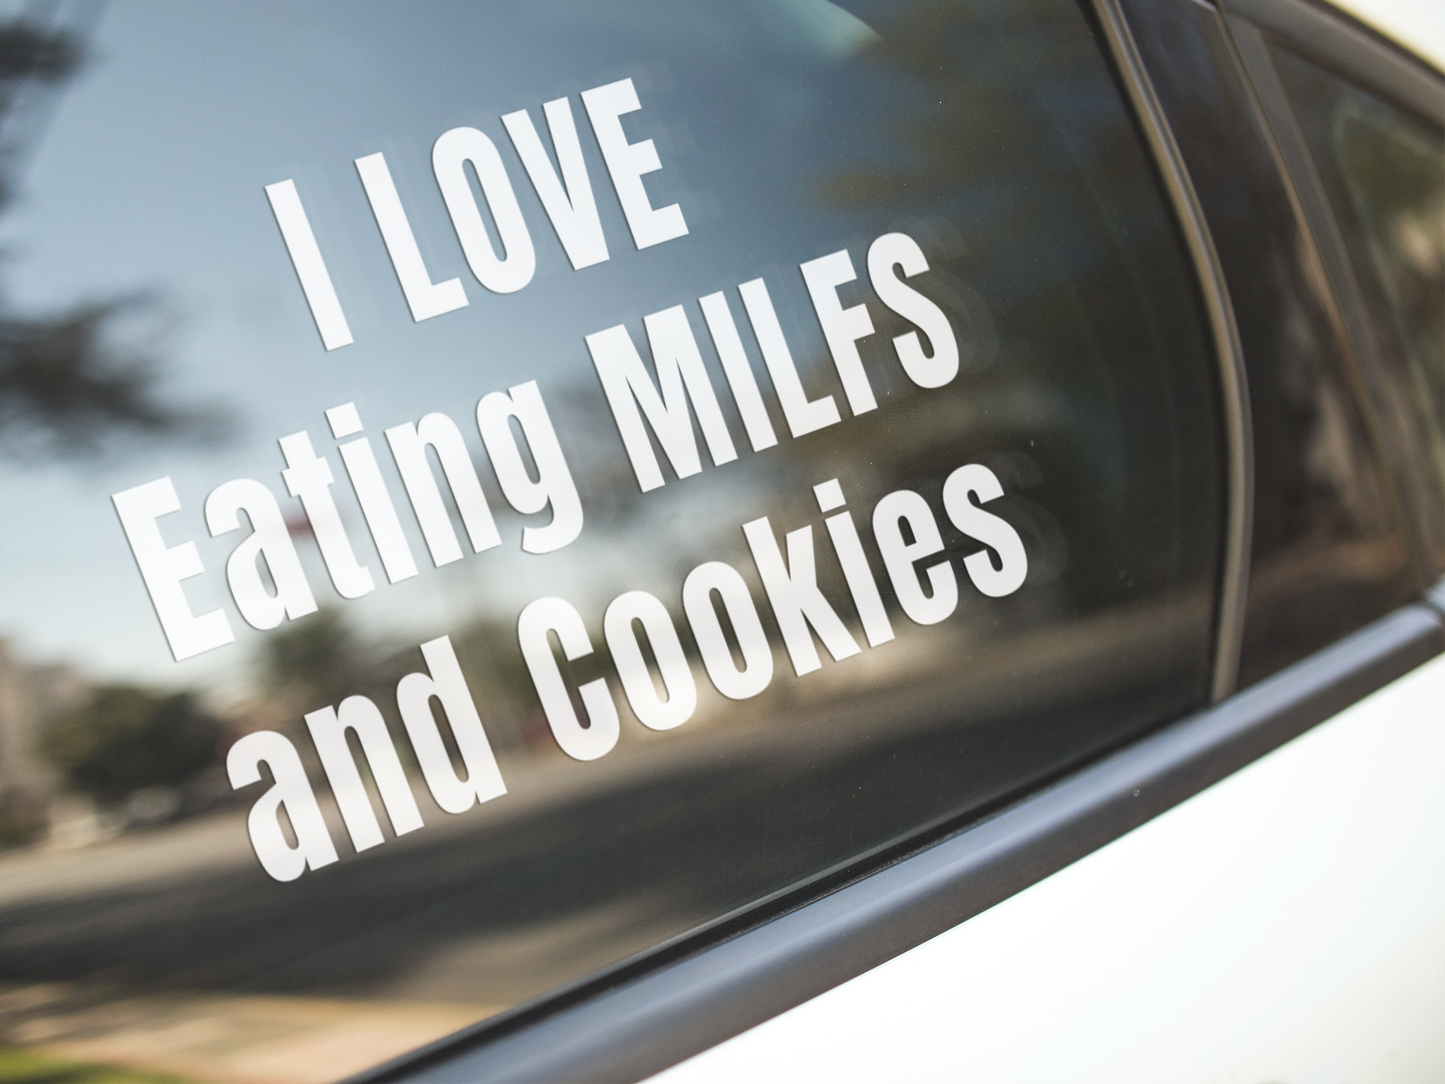 I love eating MILFs and Cookies - Vinyl Sticker